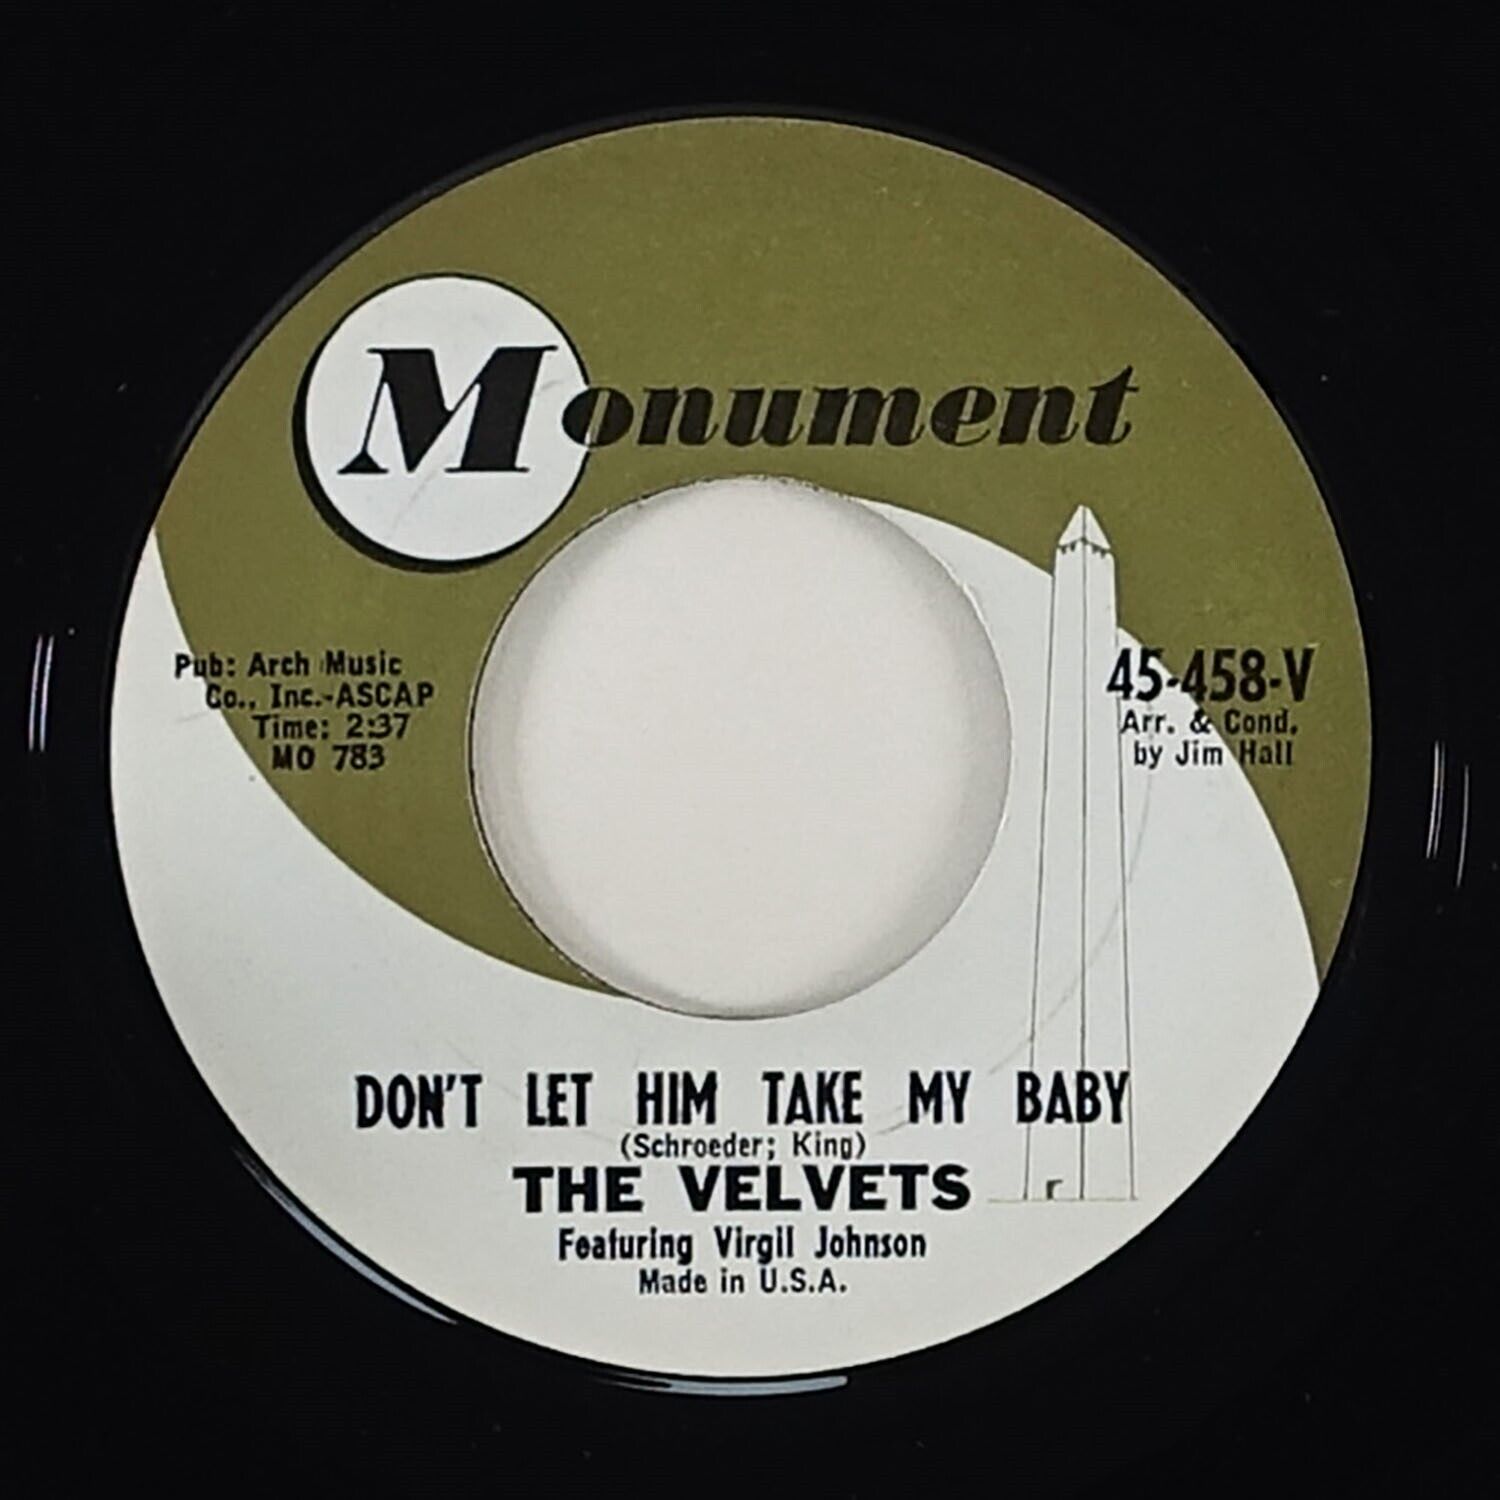 Velvets "Don't Let Him Take My Baby" Northern Soul Popcorn 45 Monument HEAR